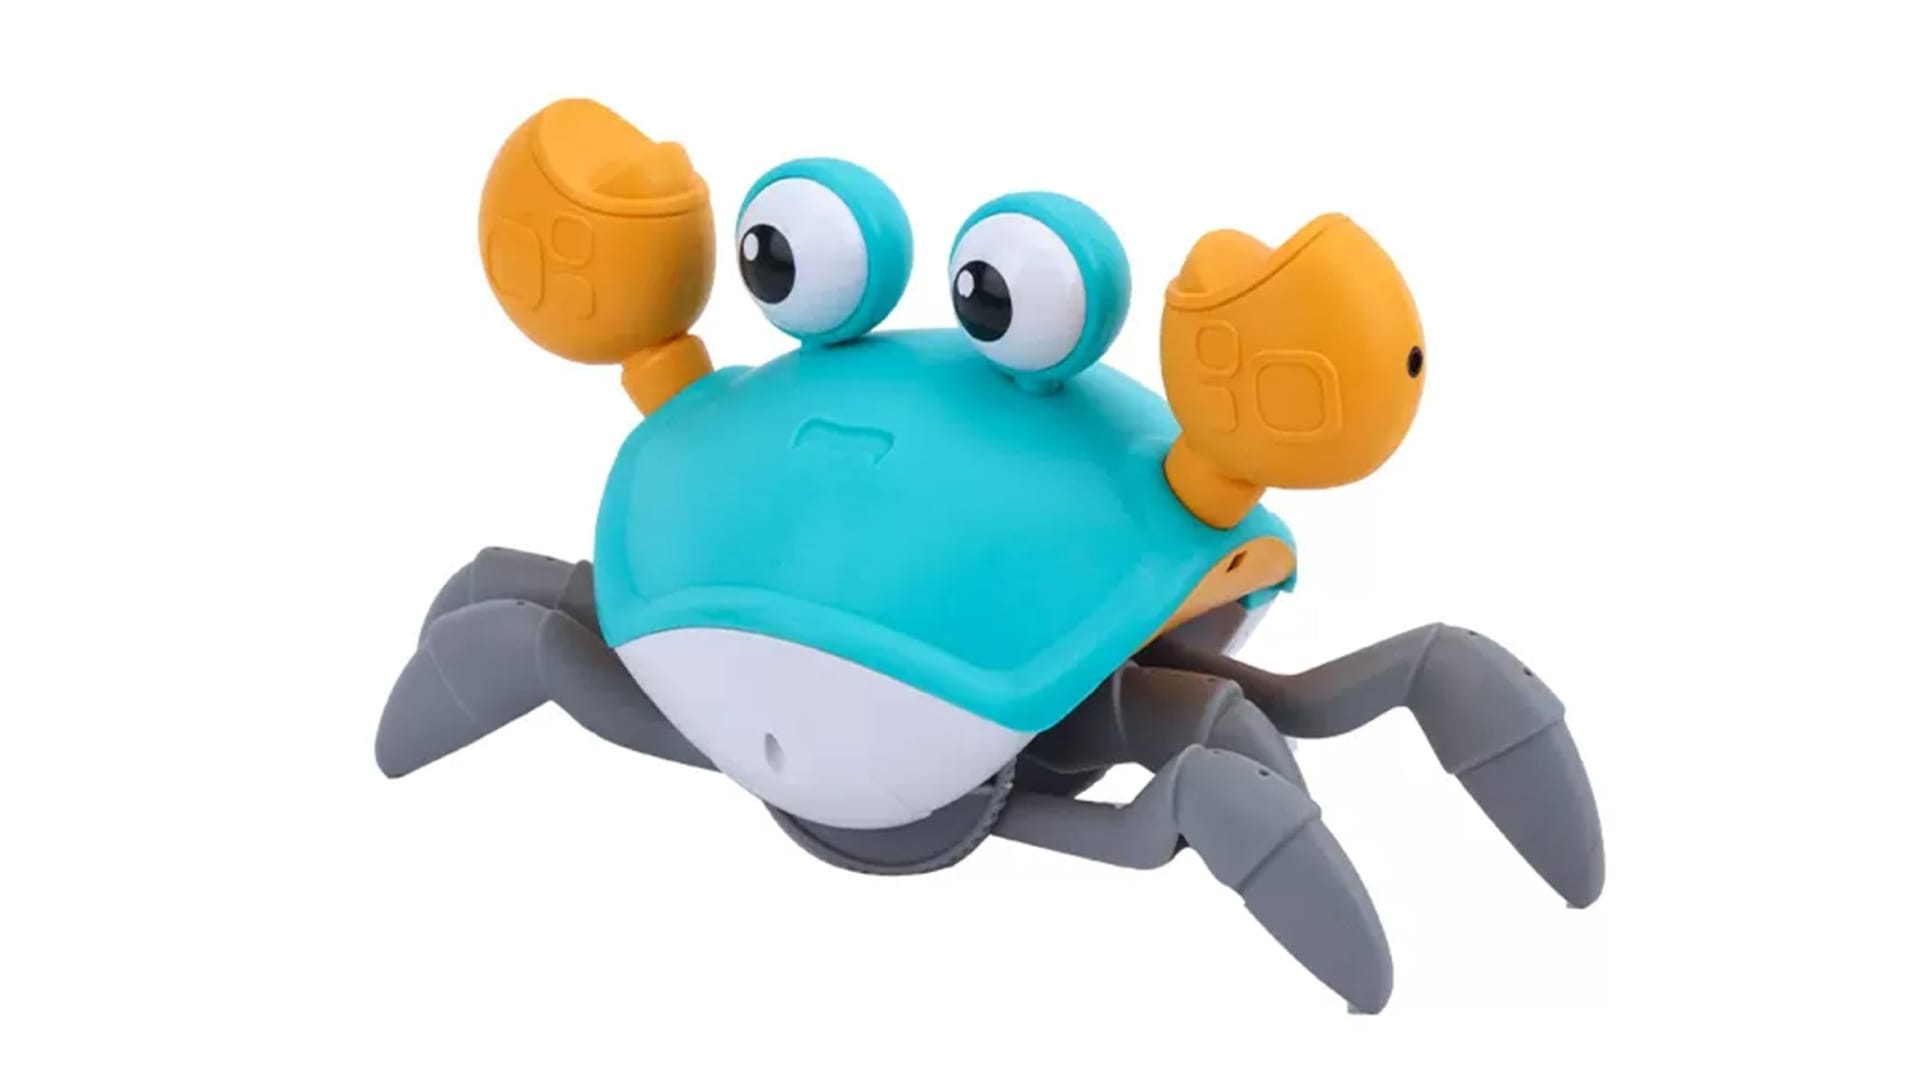 A crawling crab toy with exaggerated eyes, grey legs, a blue body and yellow pinchers